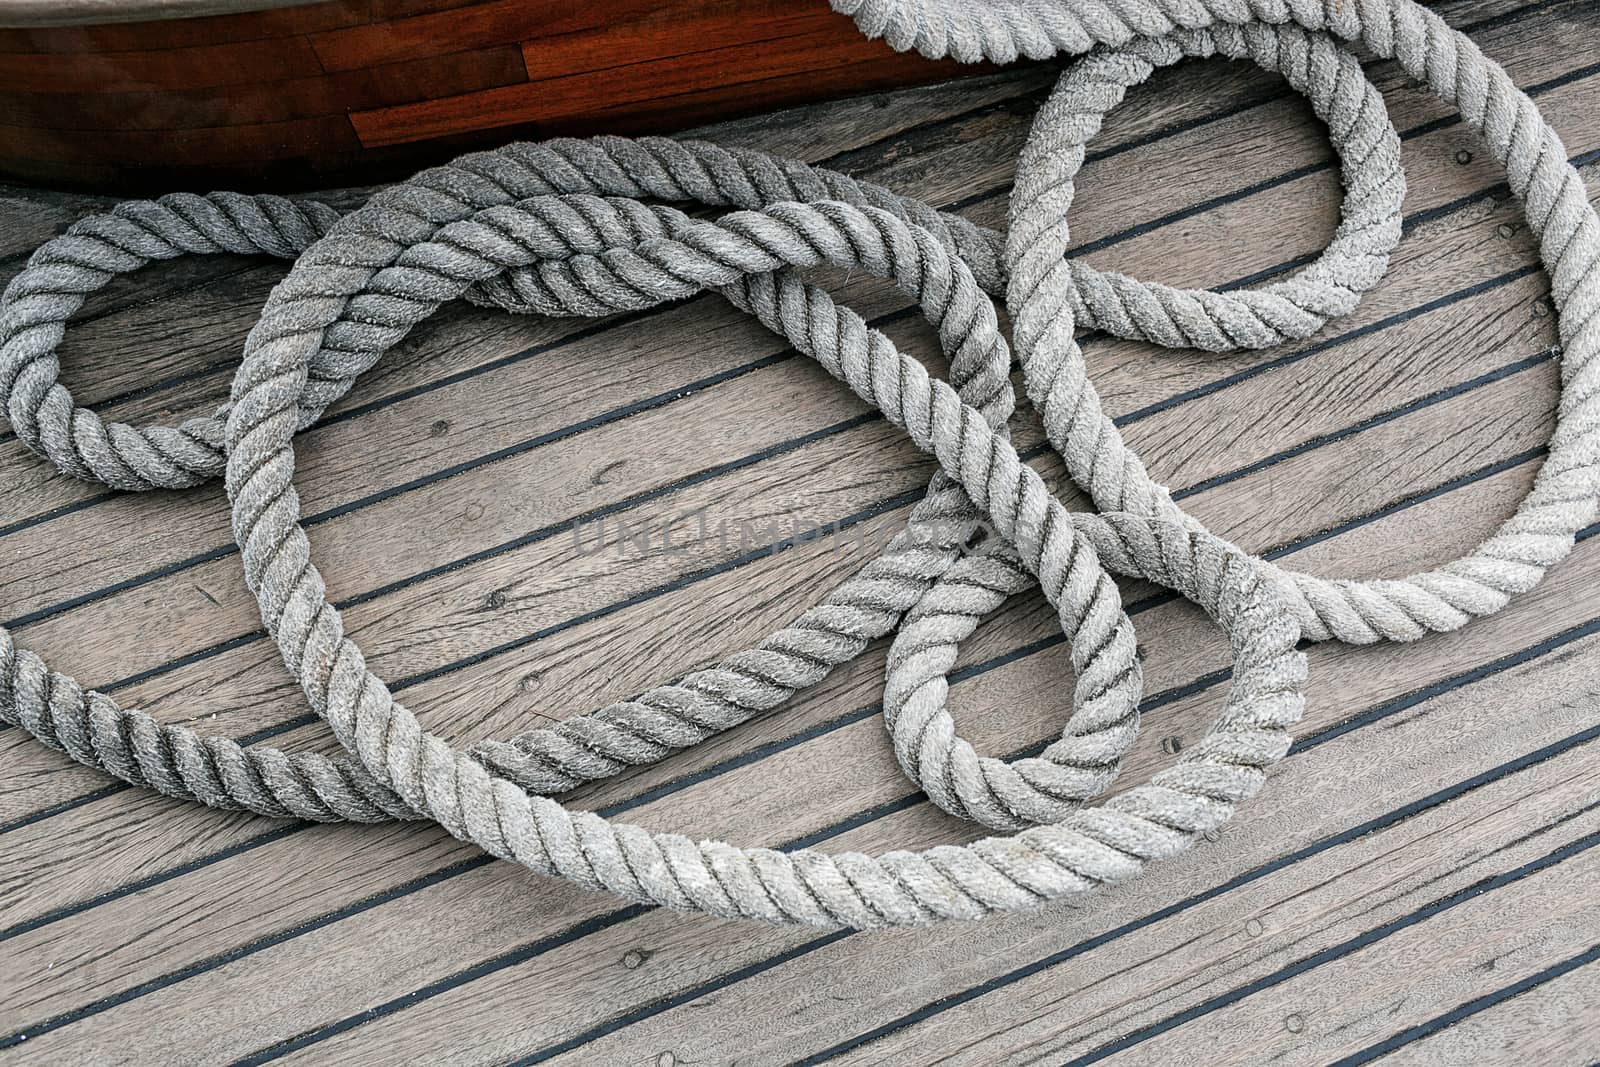 Coiled rope on a wooden deck by gorov108